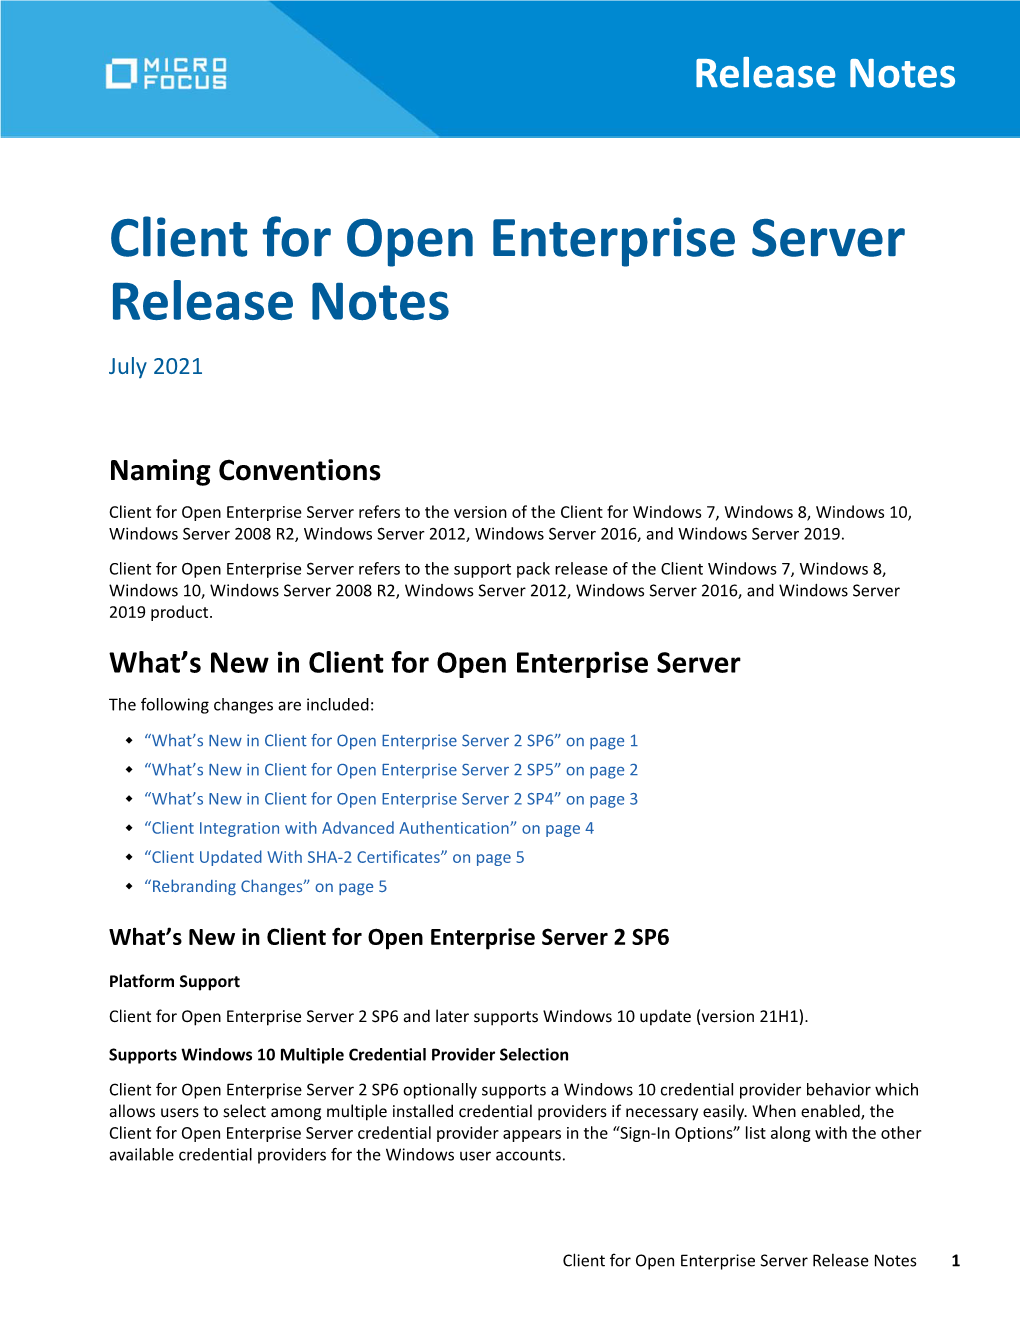 Installing the Client for Open Enterprise Server” on Page 7